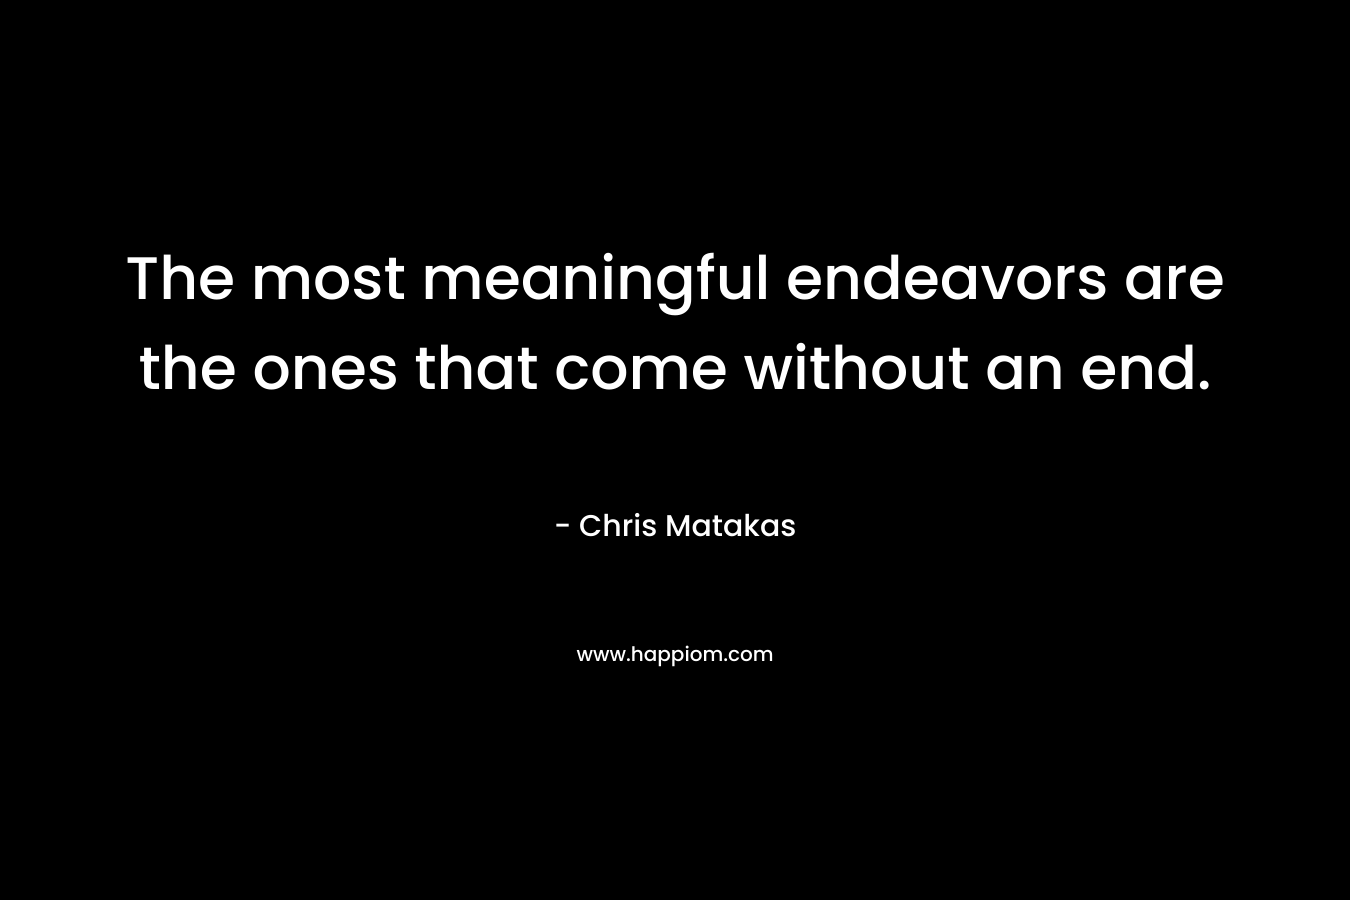 The most meaningful endeavors are the ones that come without an end. – Chris Matakas